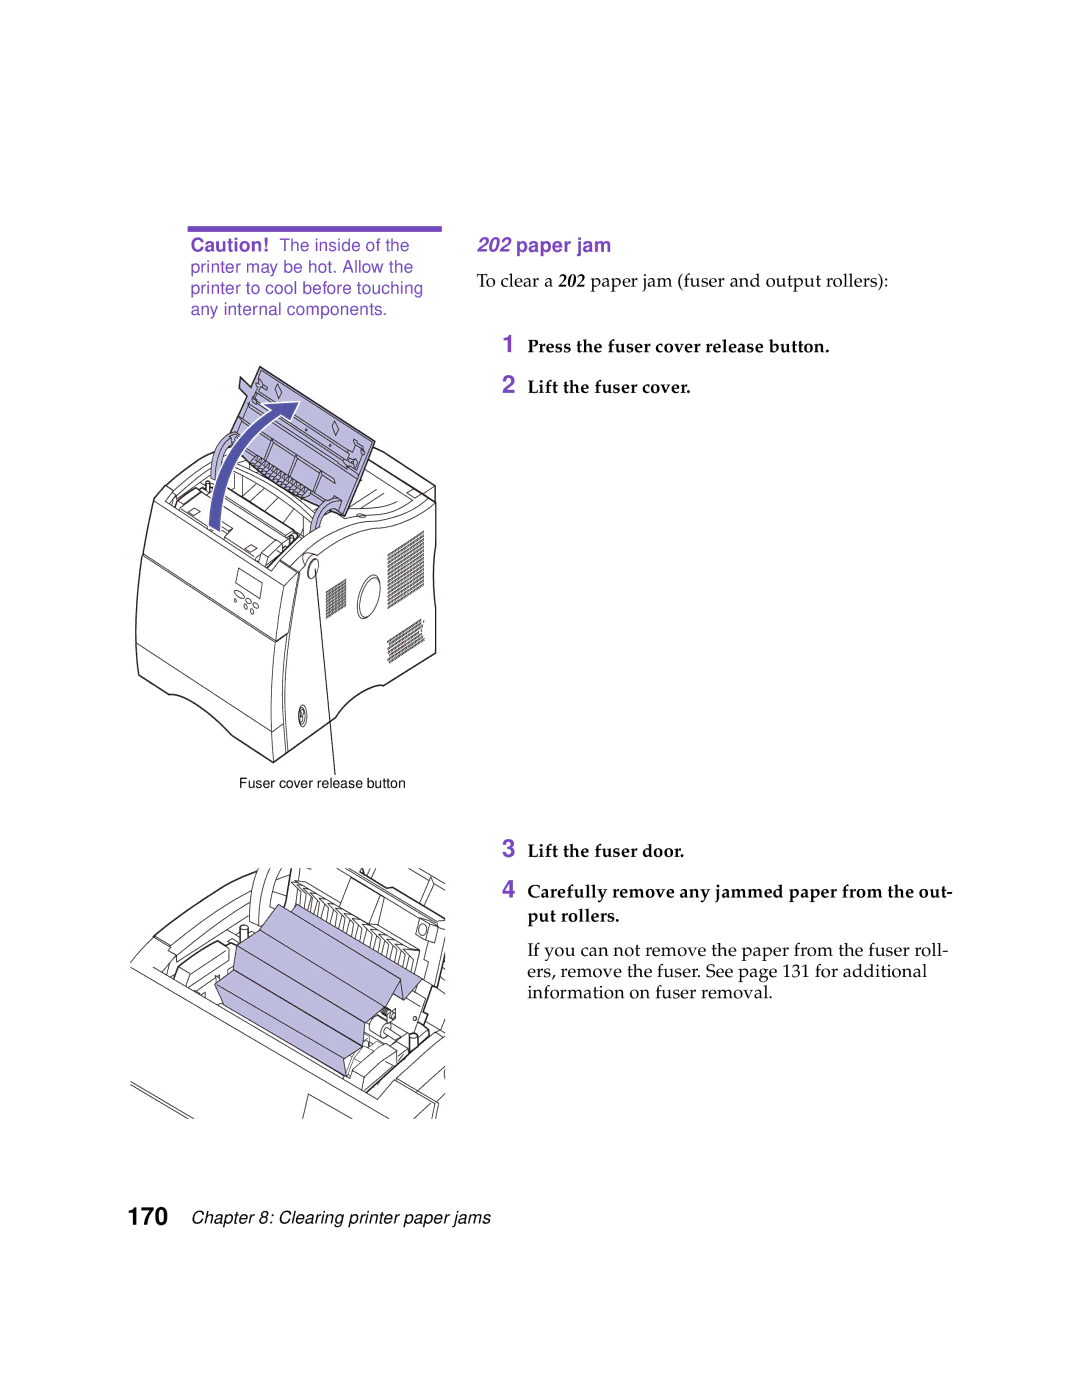 Lexmark Optra C710 manual Paper jam, Carefully remove any jammed paper from the out- put rollers 